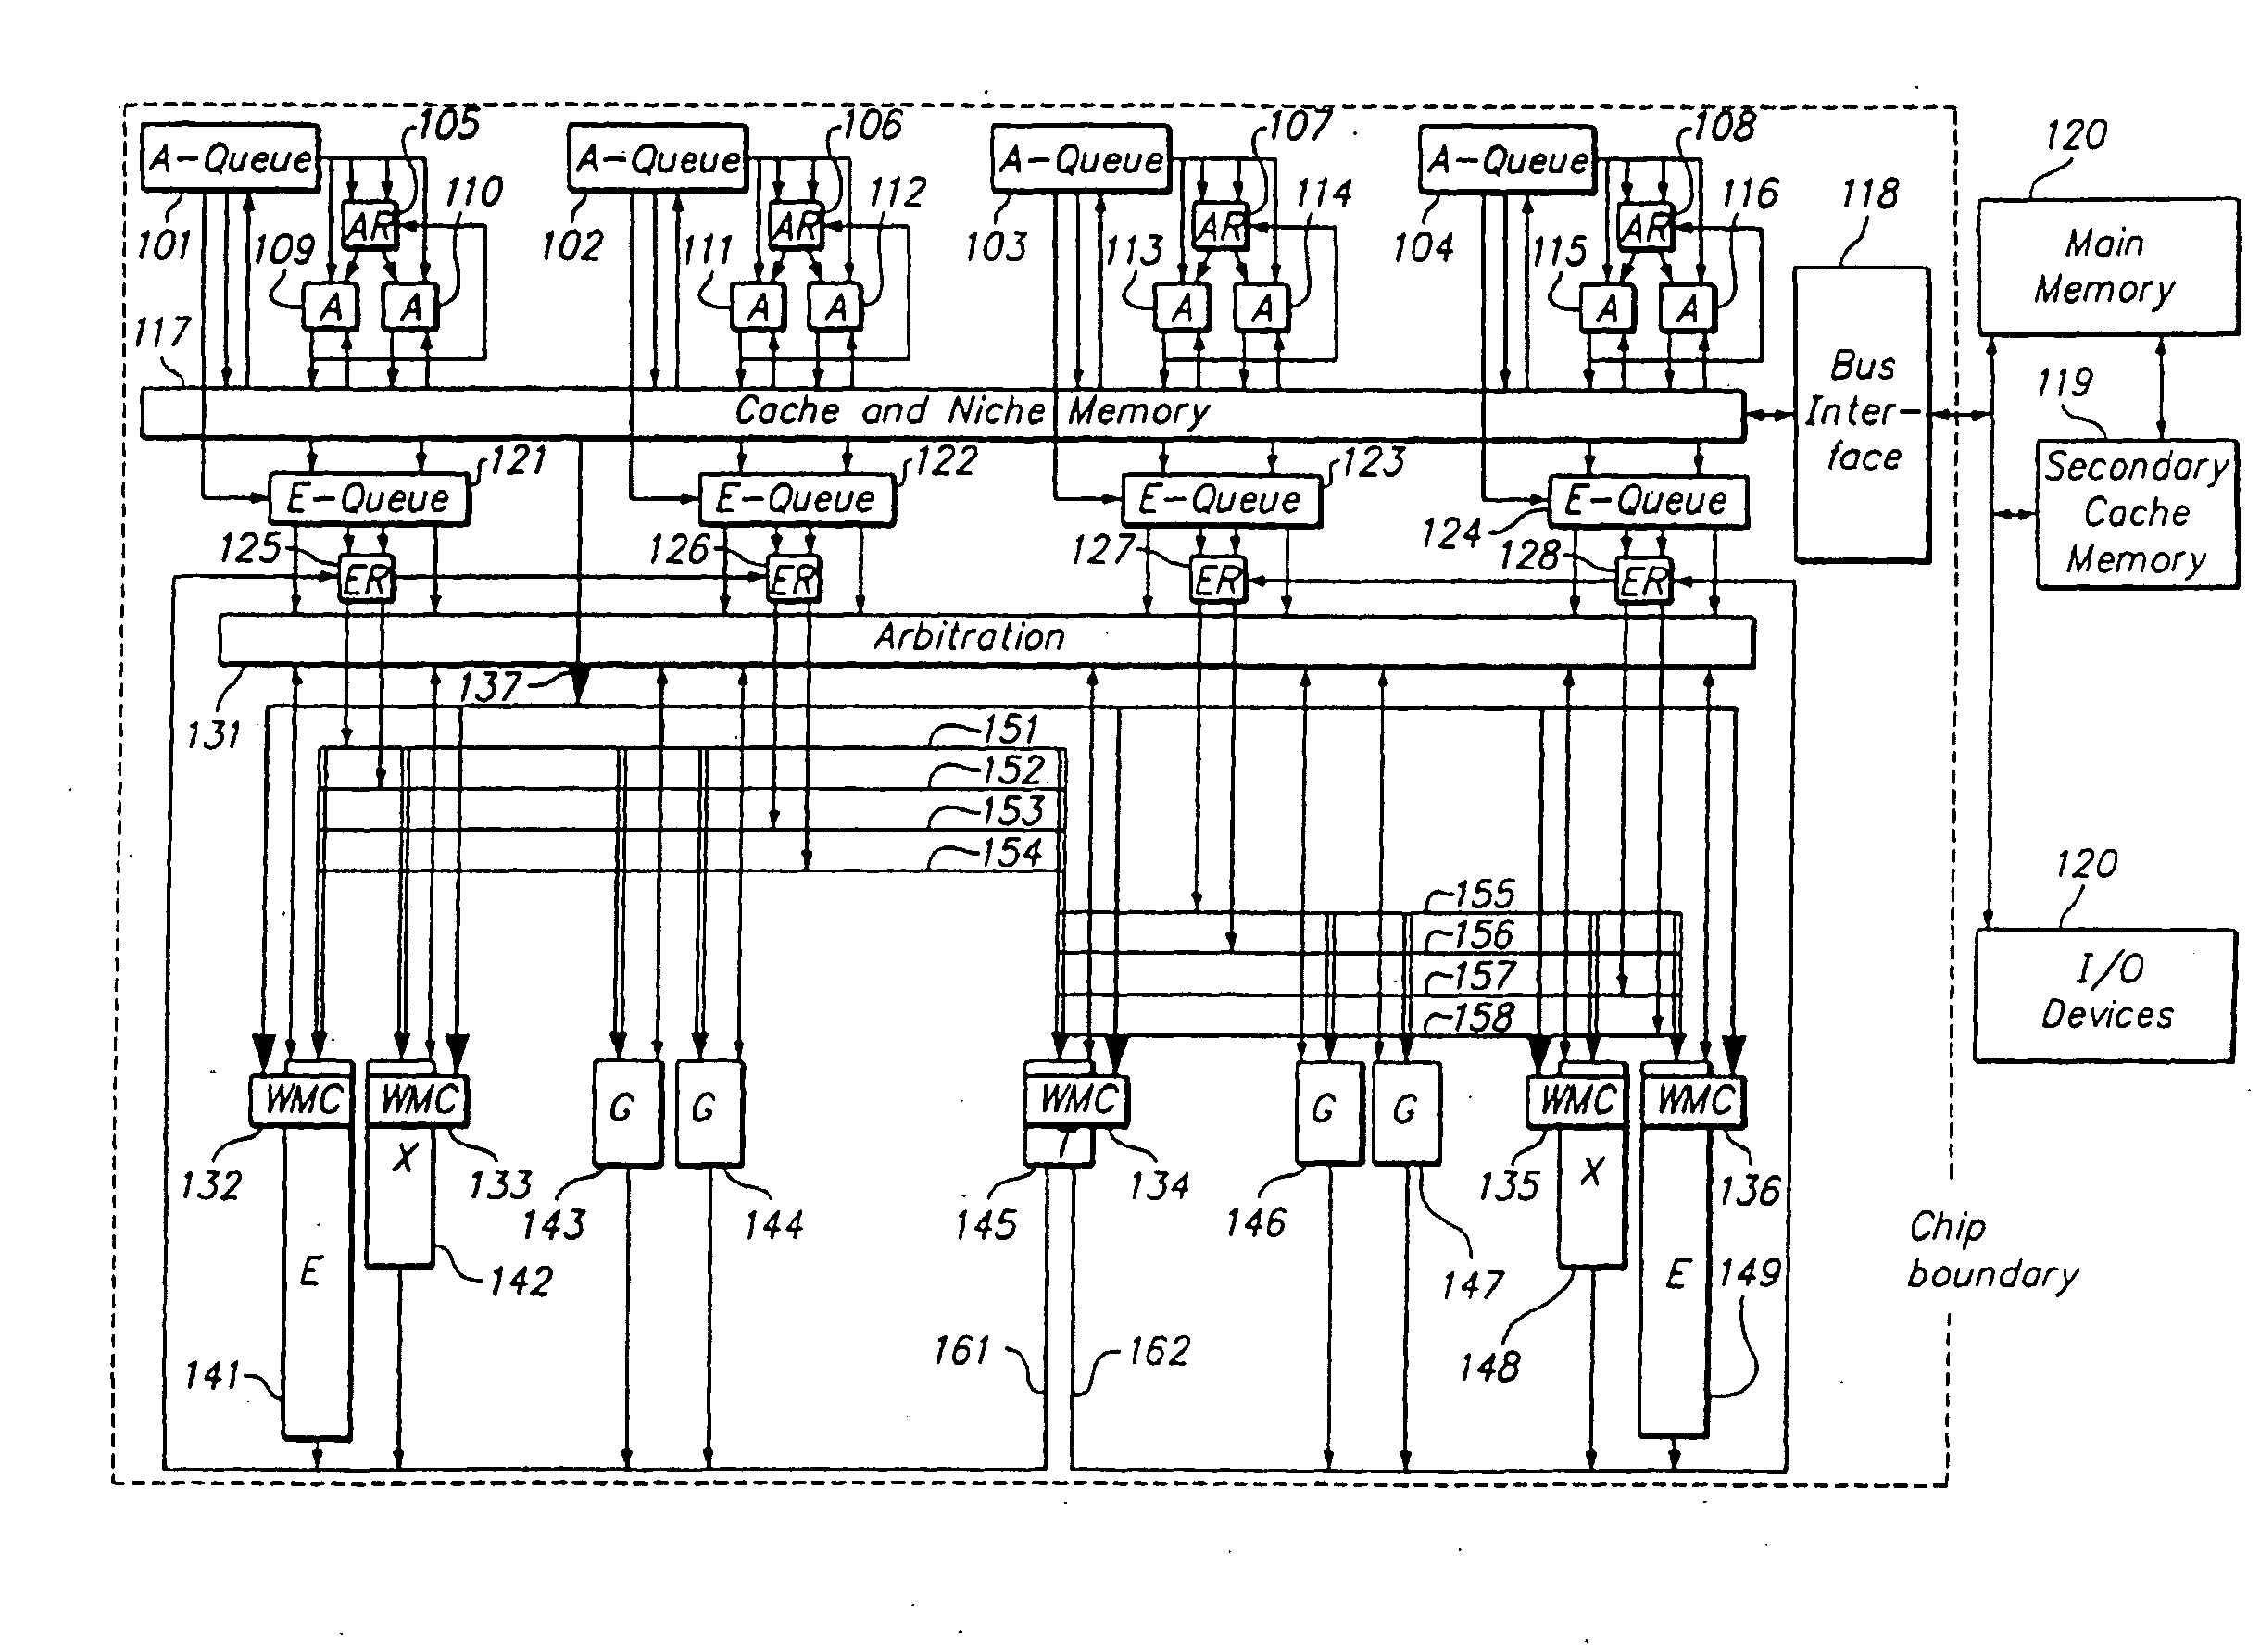 Processor for executing switch and translate instructions requiring wide operands